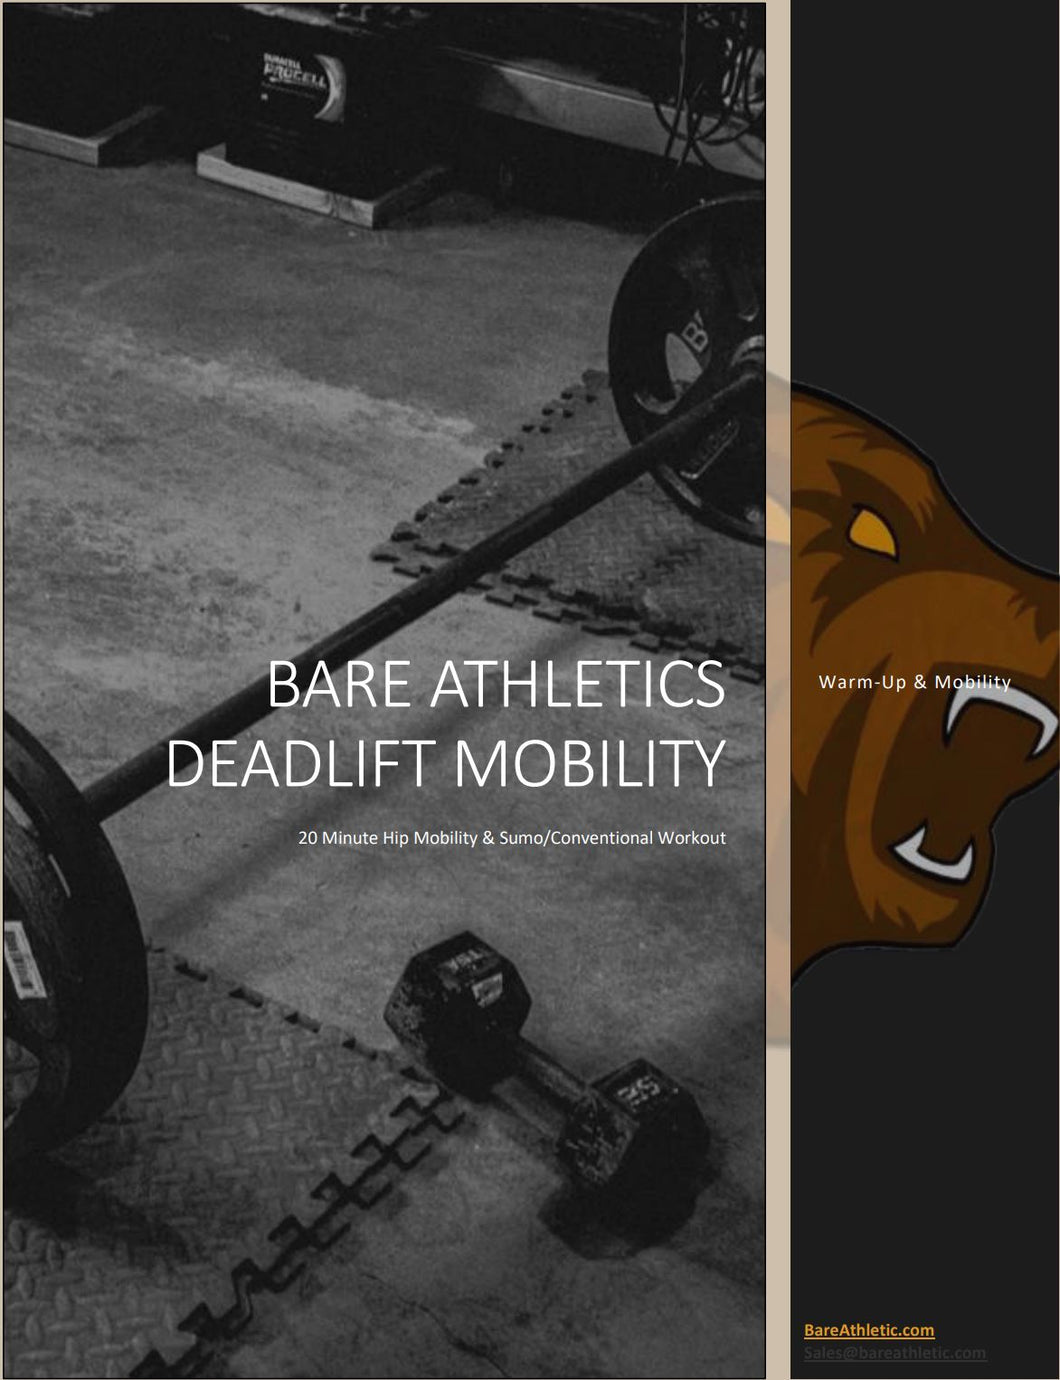 BARE Hip-Mobility & Deadlift Mobility